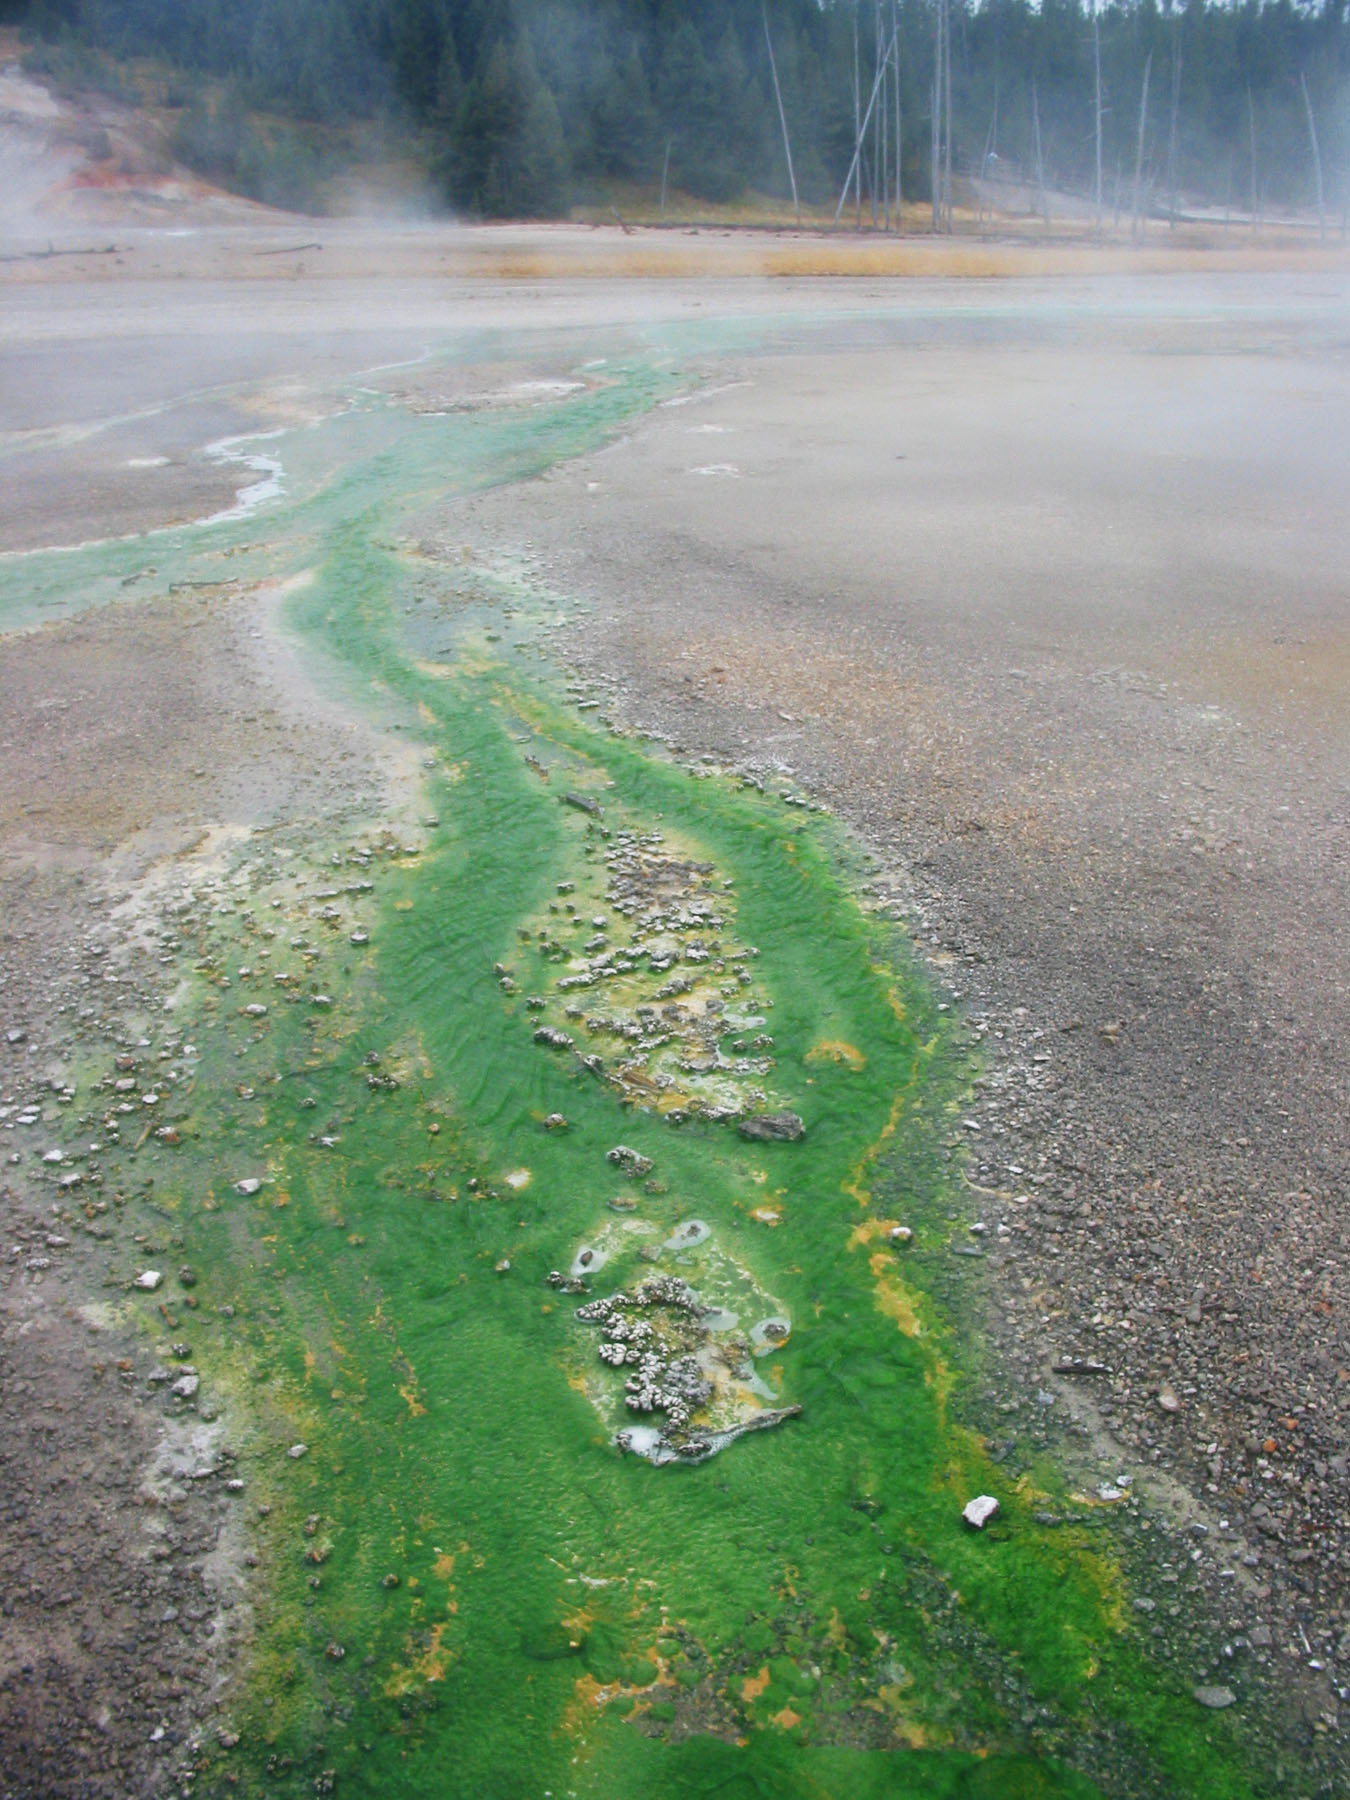 A bacteria mat in one of the geyser basins